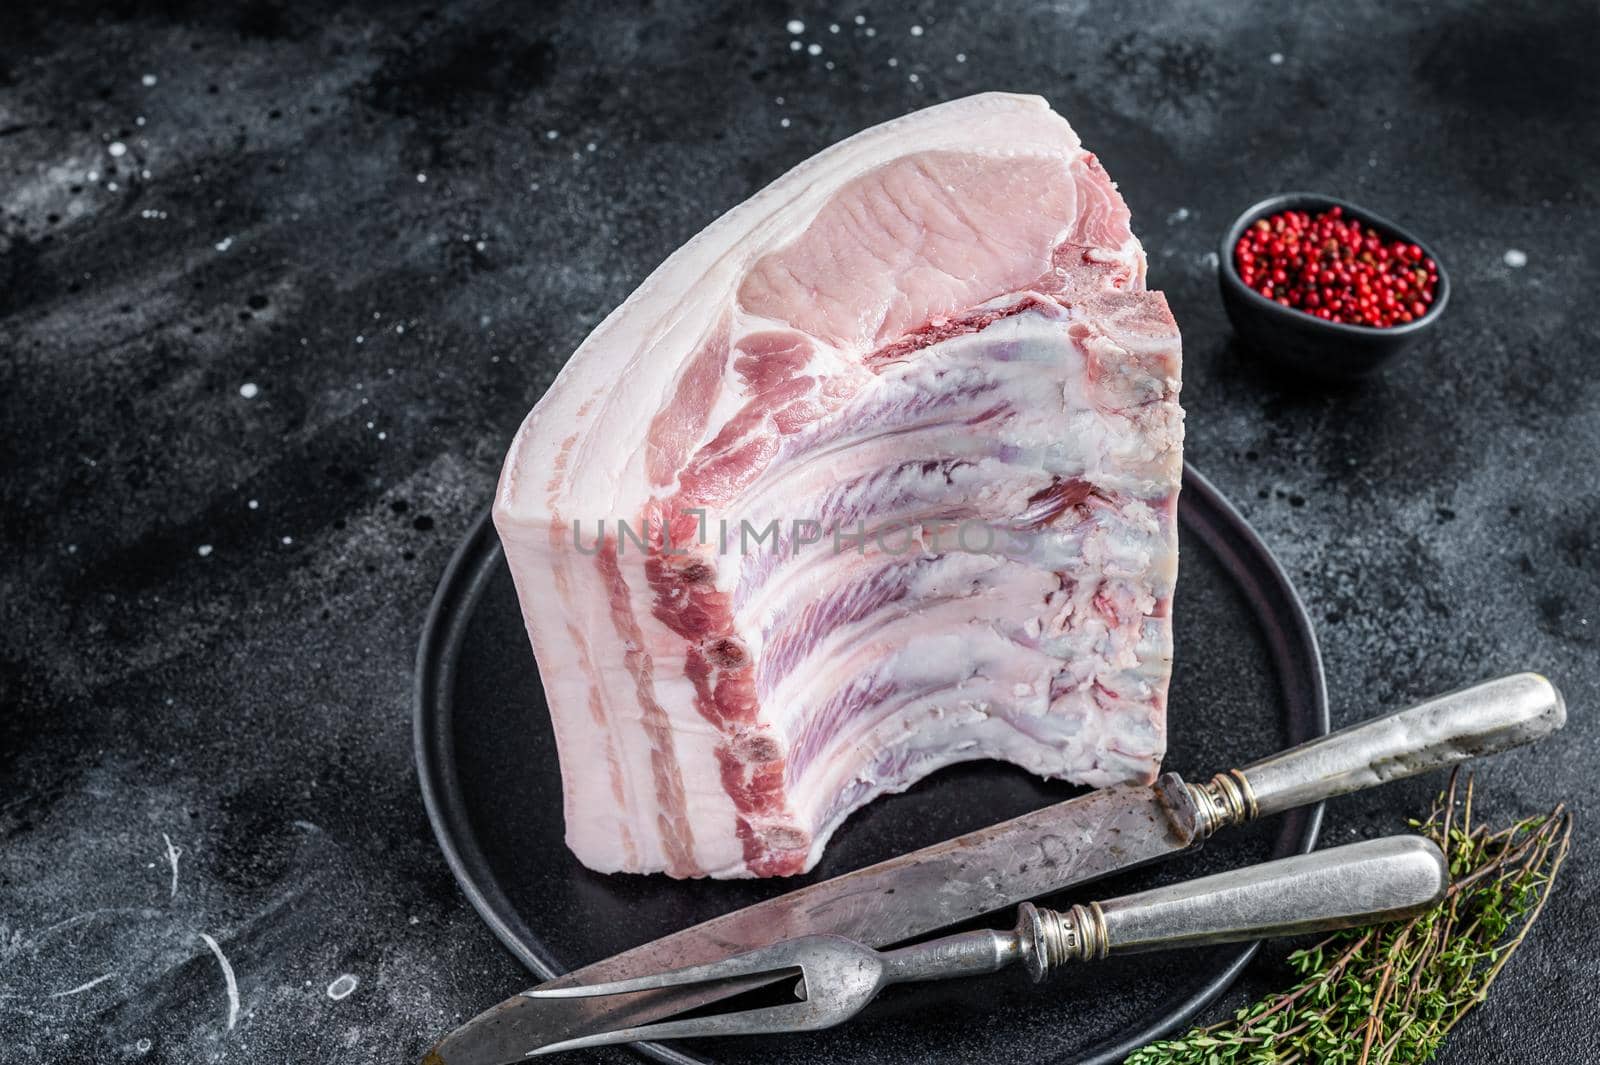 Fresh Raw whole rack of pork loin chops with ribs on a plate with meat fork. Black background. Top view by Composter